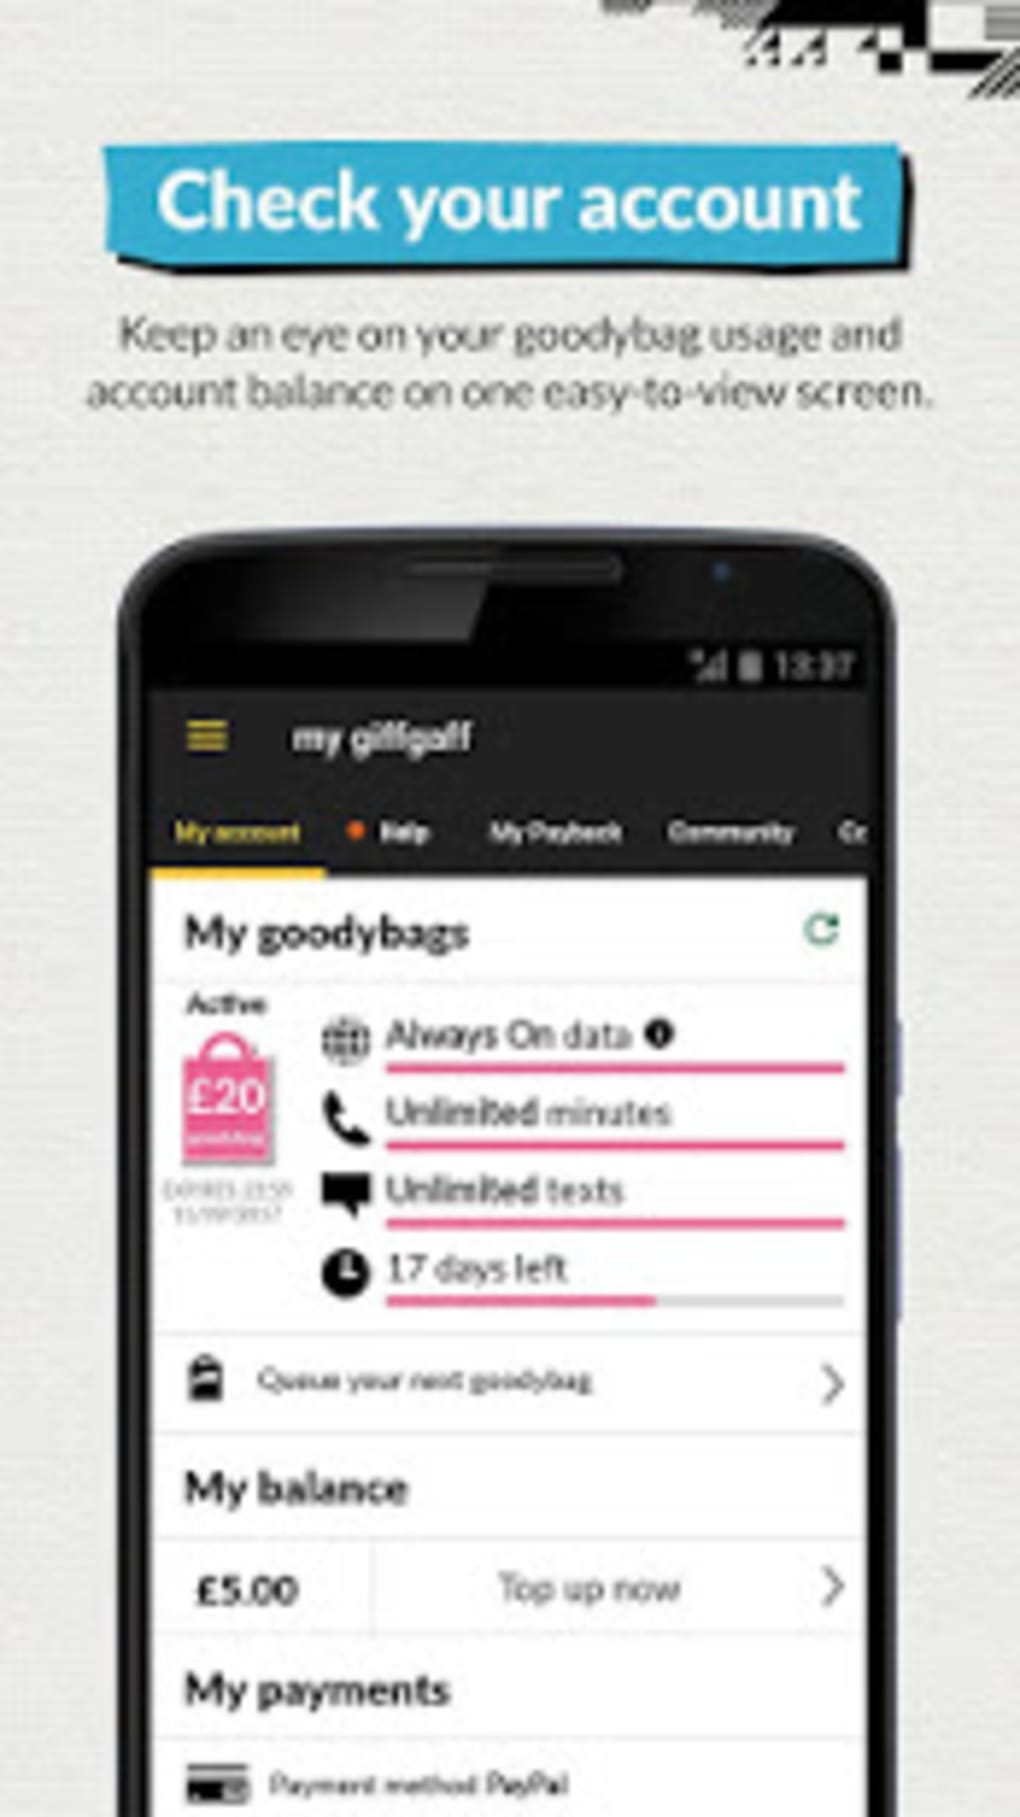 giffgaff app, Download and manage your account